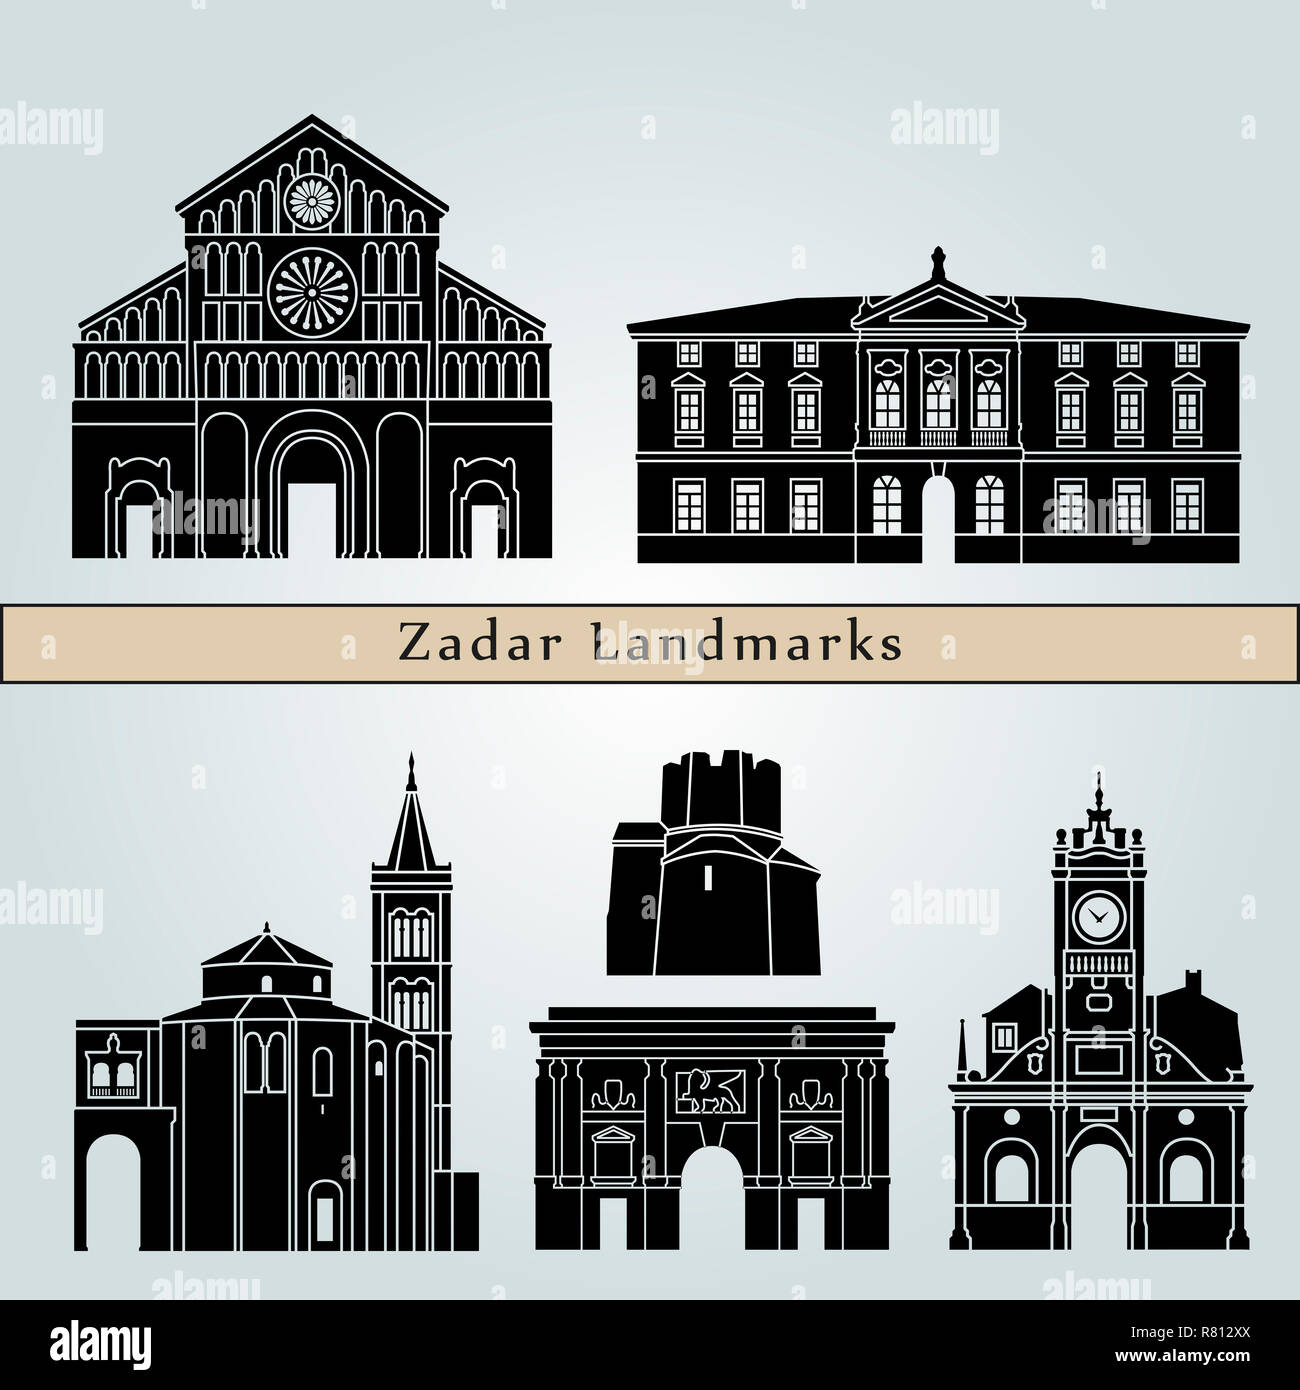 Zadar landmarks and monuments isolated on blue background in editable vector file Stock Photo